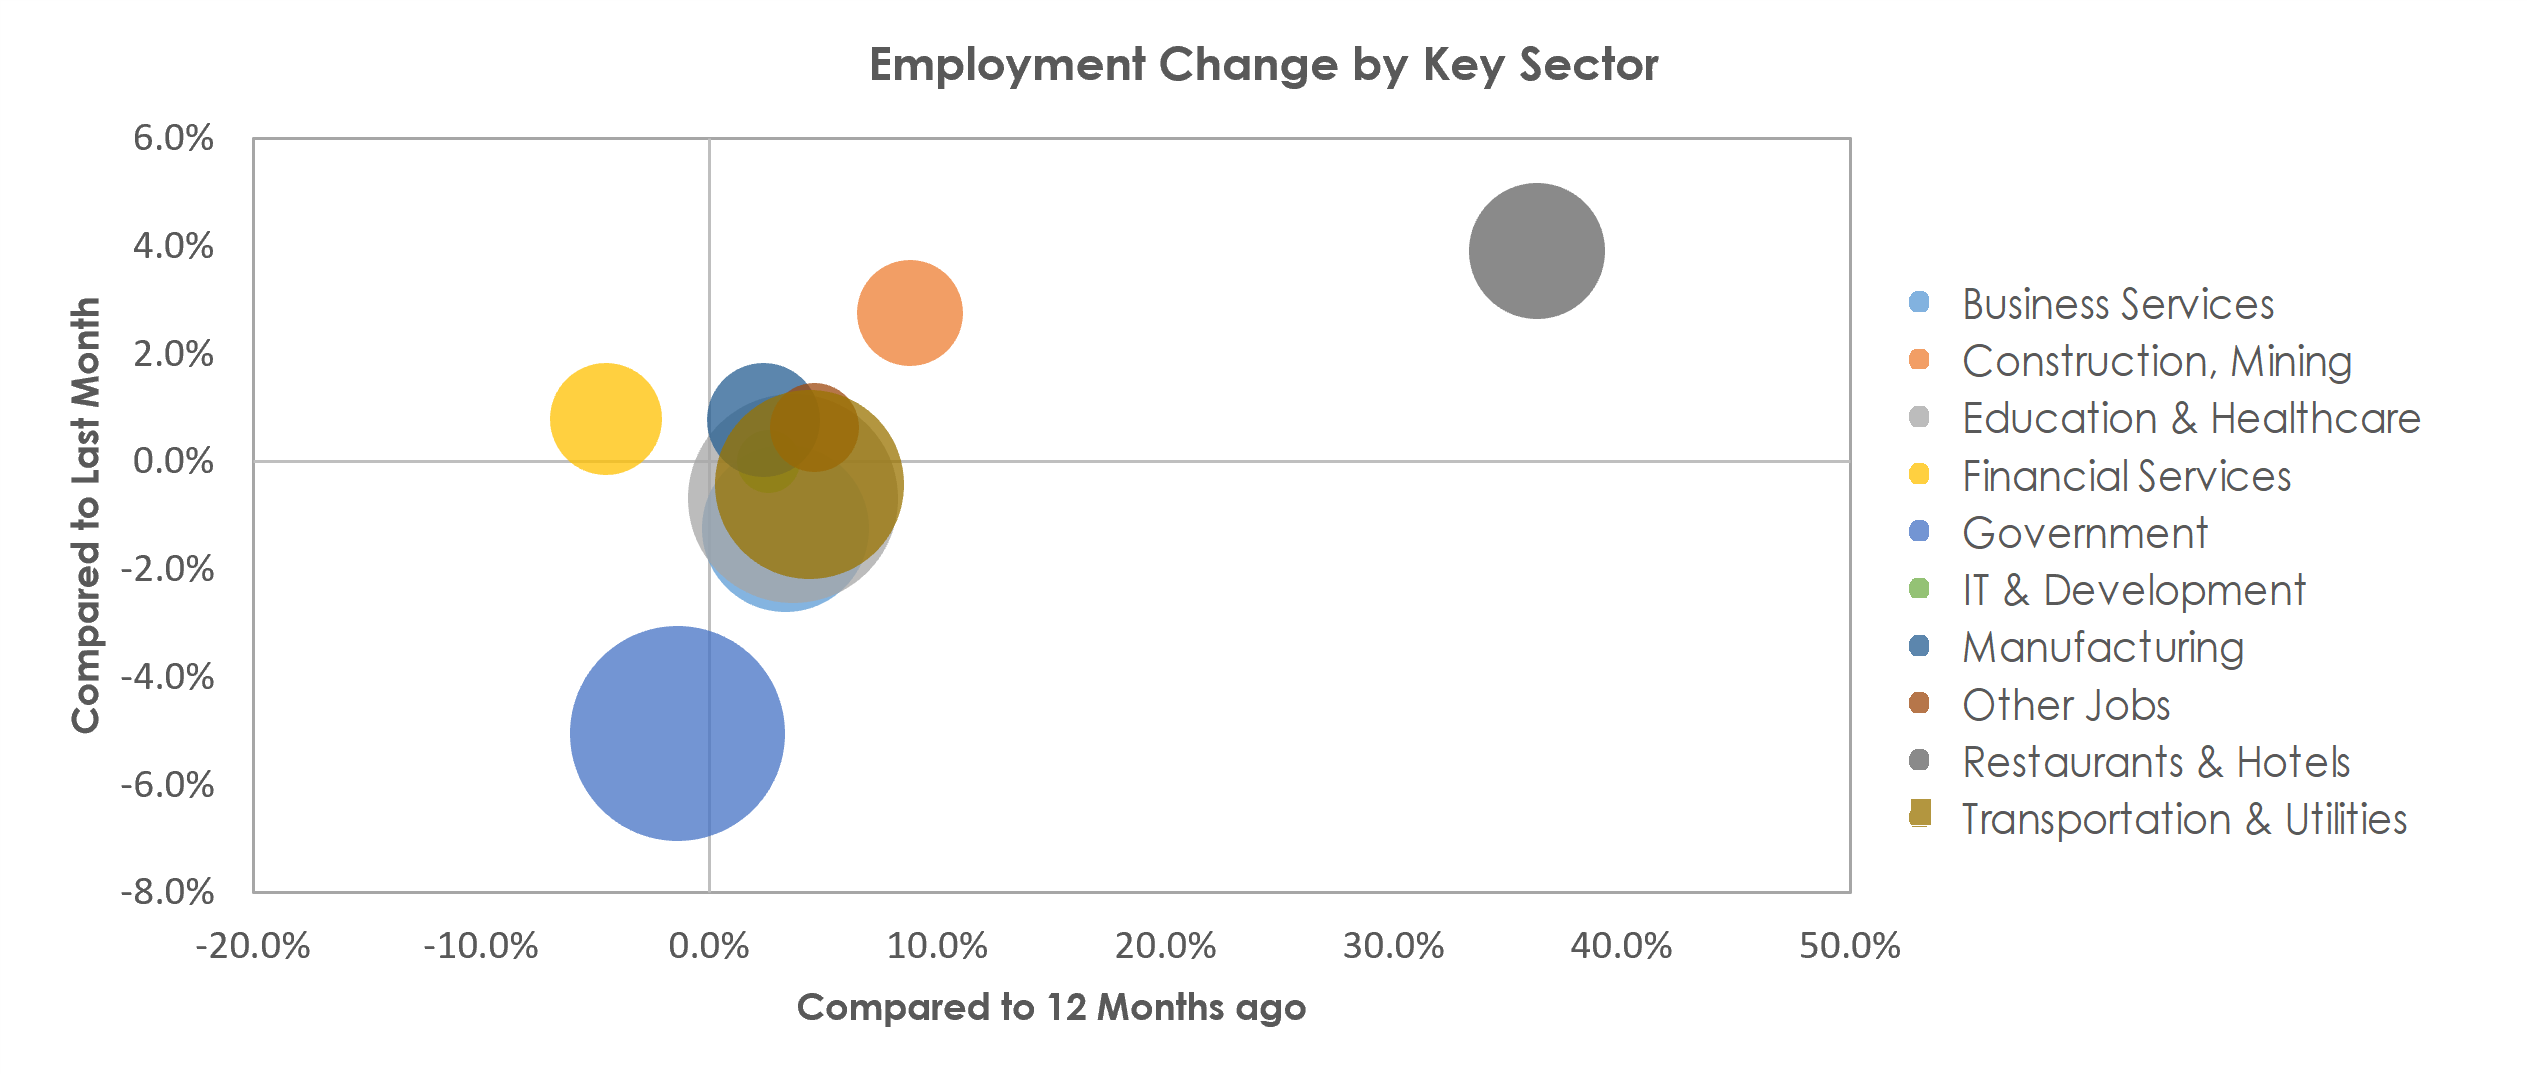 Albany-Schenectady-Troy, NY Unemployment by Industry July 2021